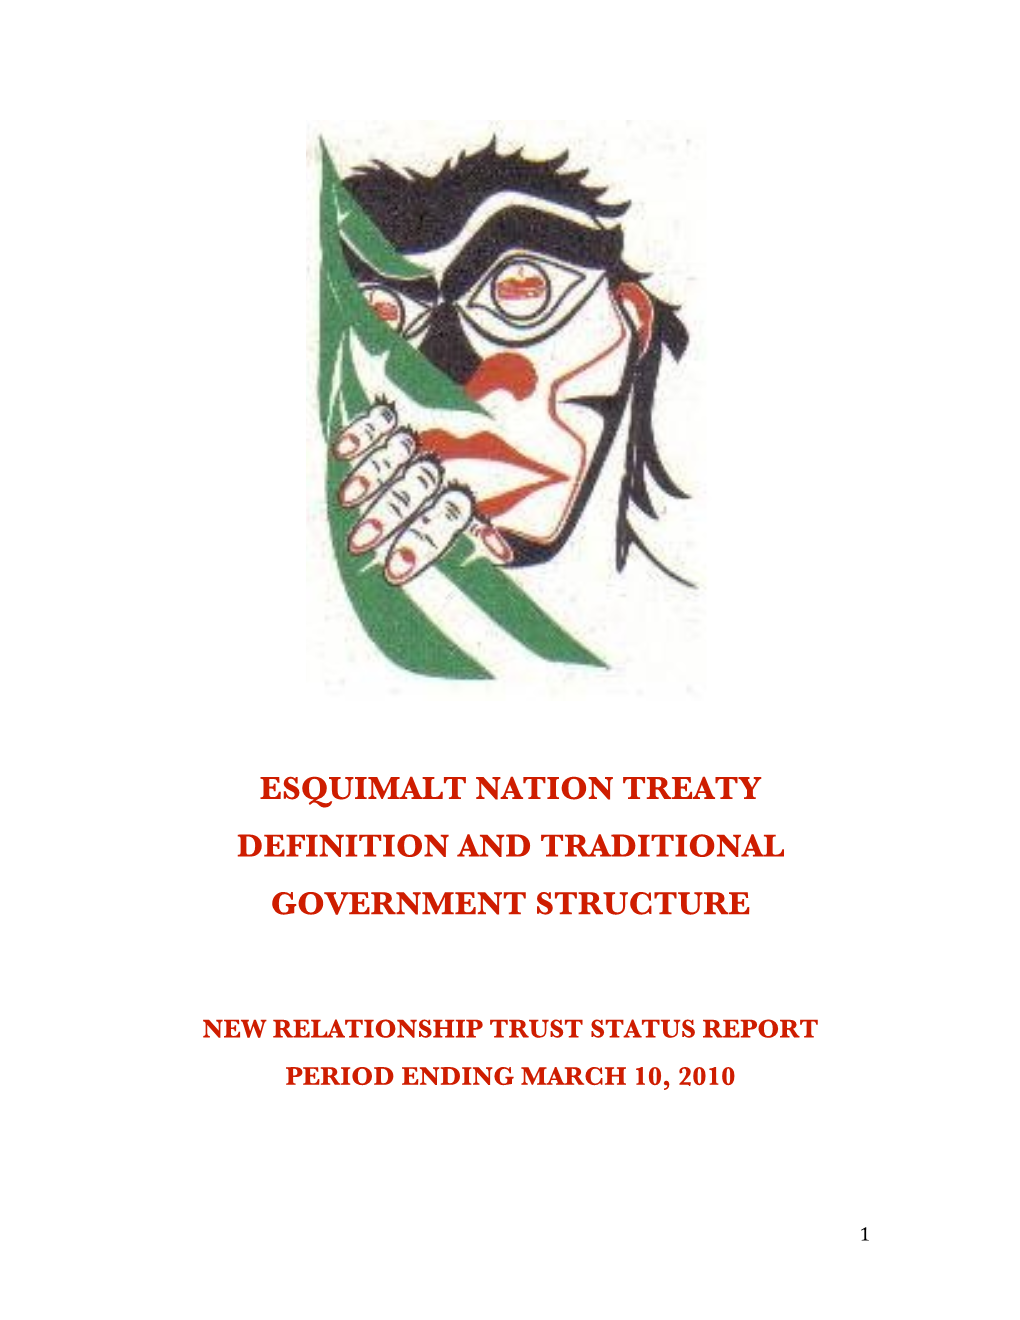 Esquimalt Nation Treaty Definition and Traditional Government Structure